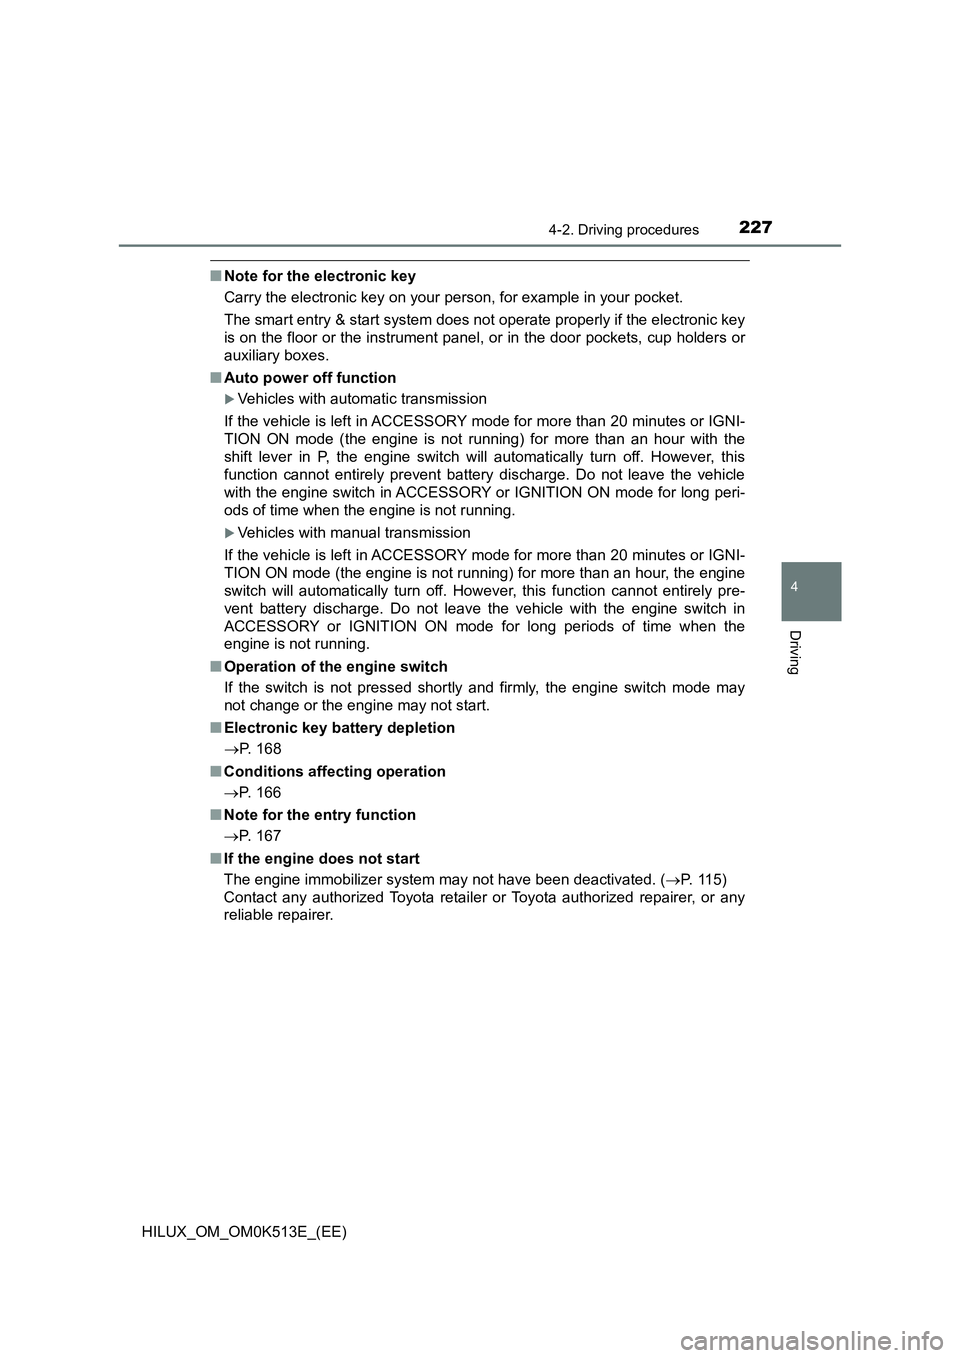 TOYOTA HILUX 2021  Owners Manual (in English) 2274-2. Driving procedures
4
Driving
HILUX_OM_OM0K513E_(EE)
�QNote for the electronic key 
Carry the electronic key on your person, for example in your pocket. 
The smart entry & start system does not